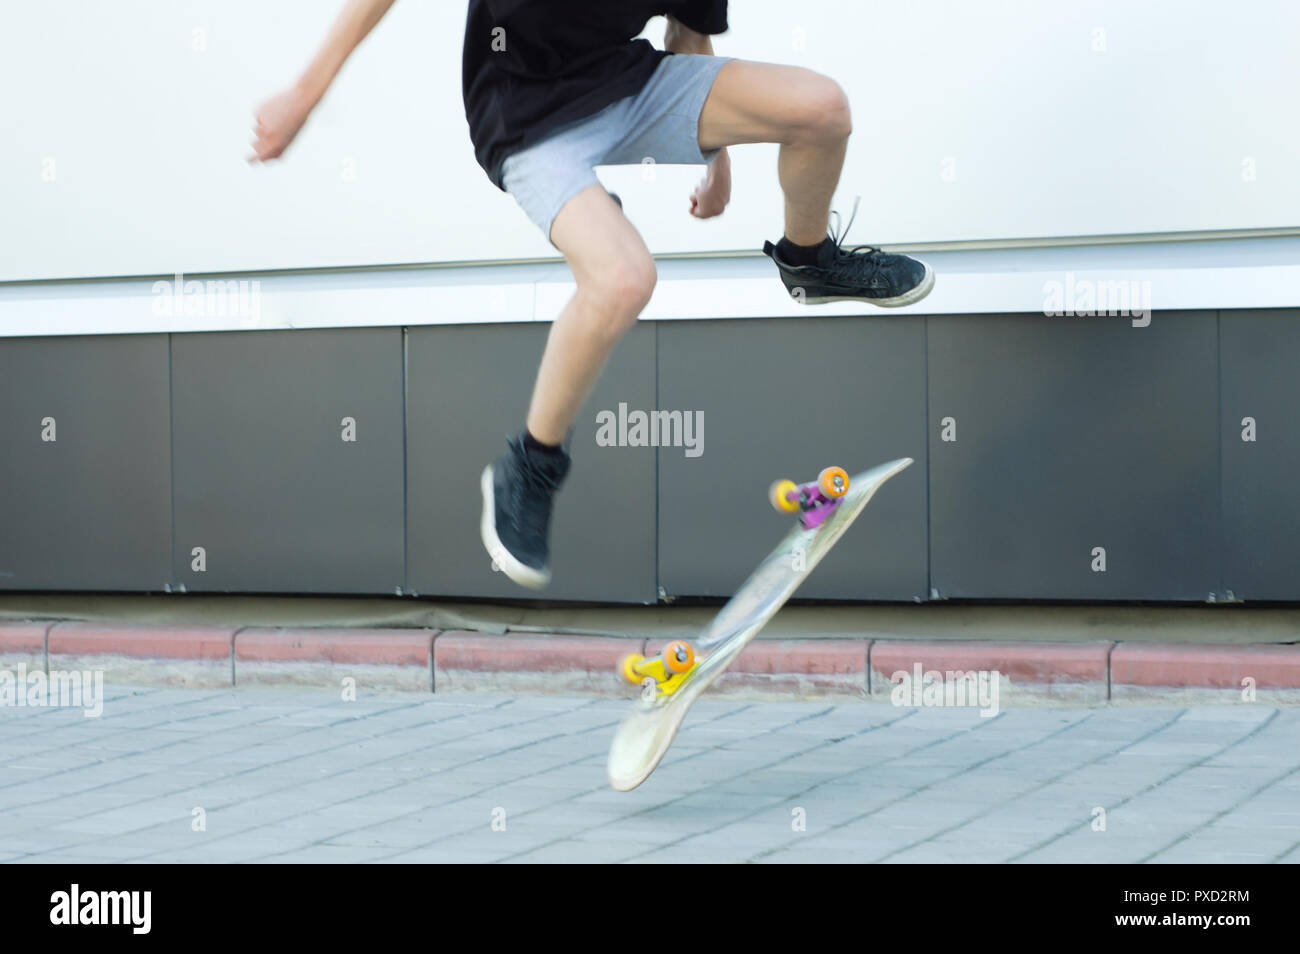 A guy is jumping on a skateboard up. Lubricated motion. Stock Photo